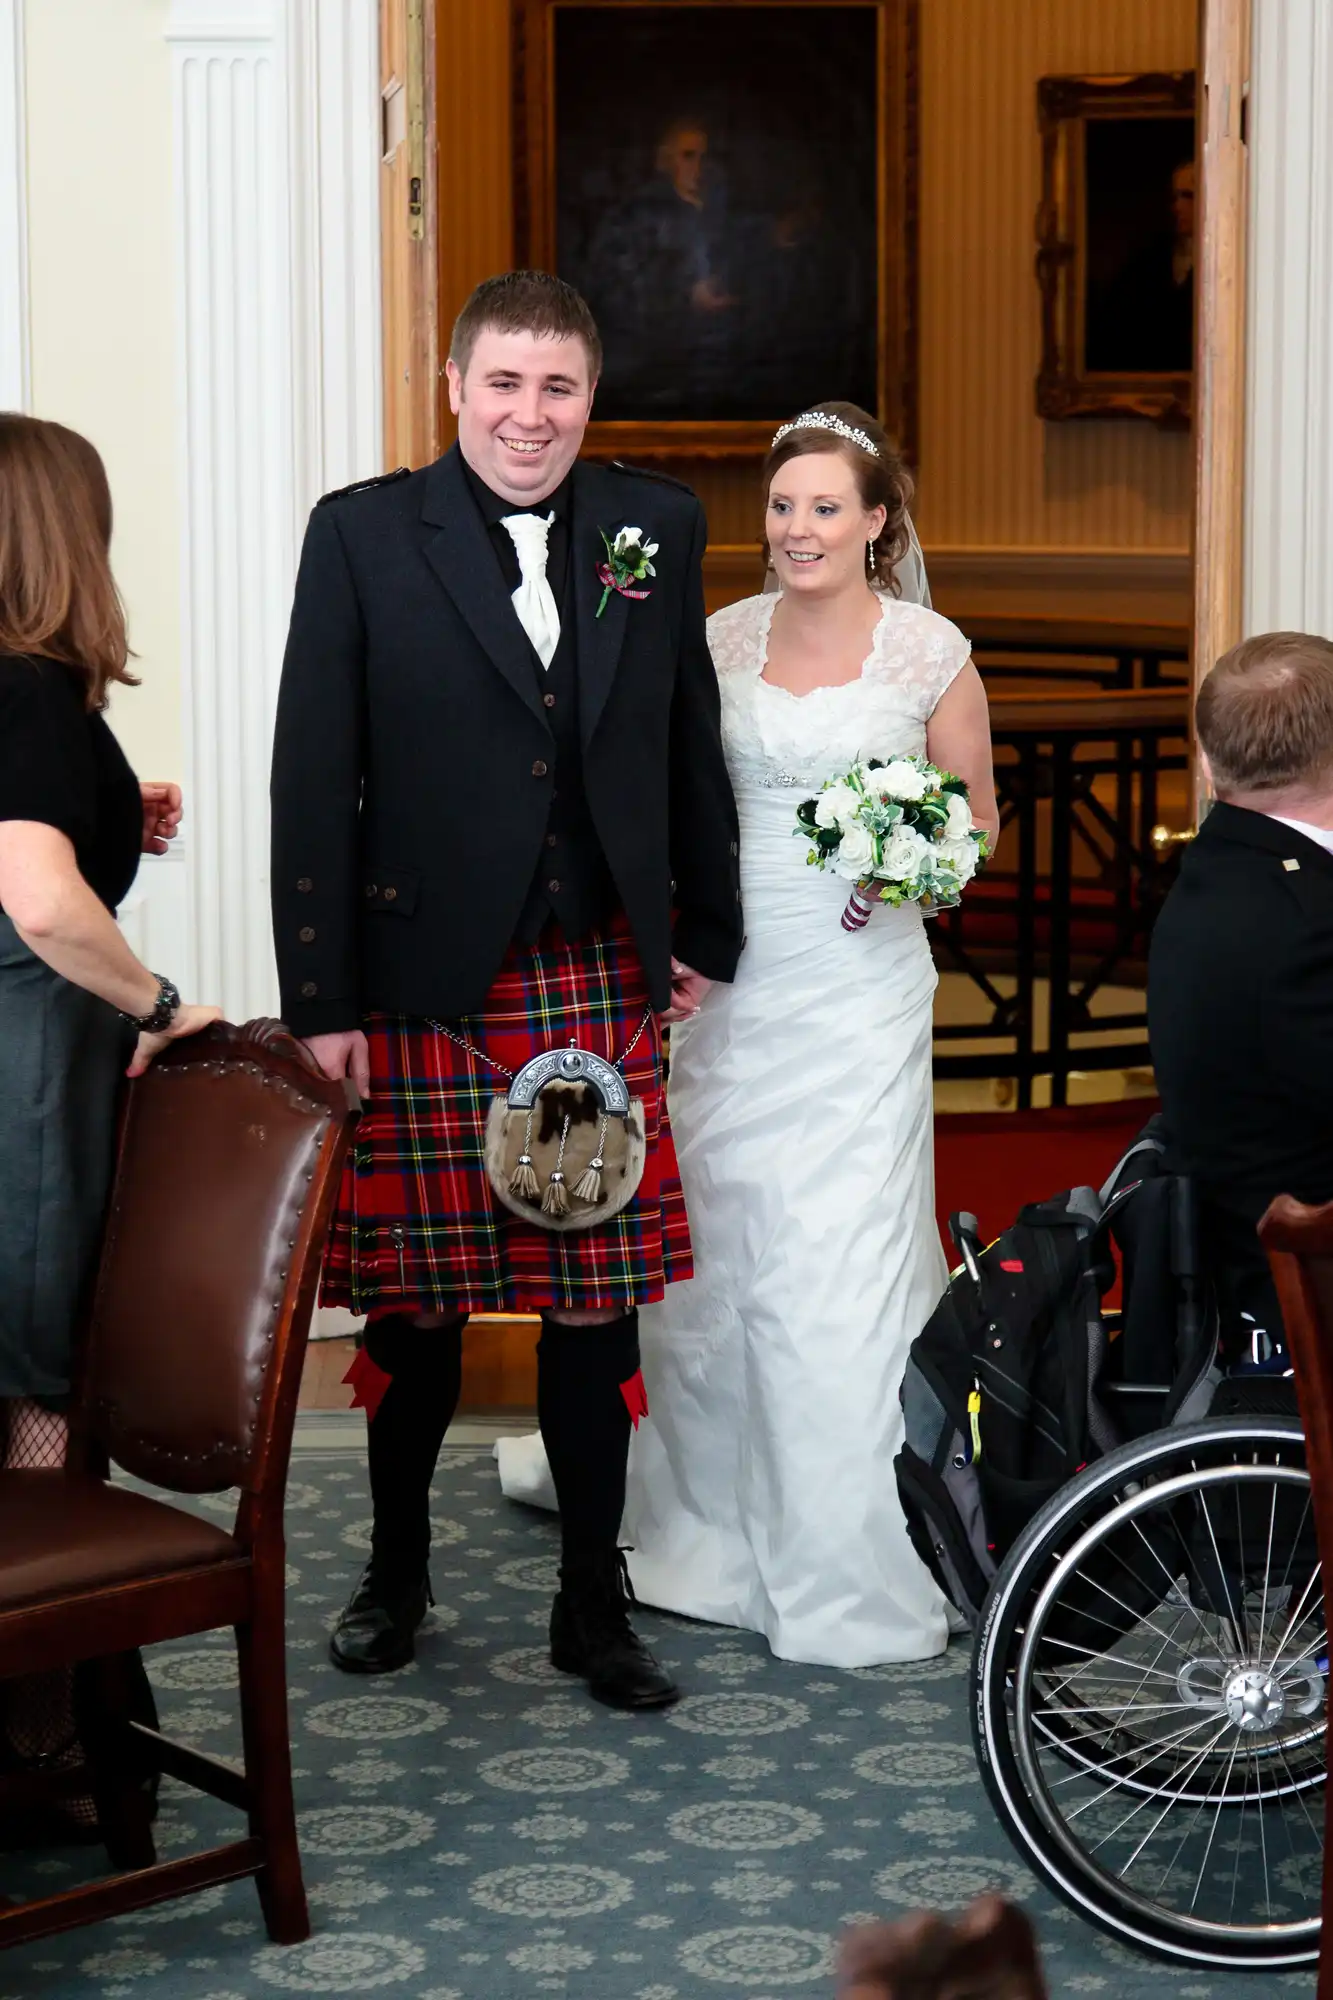 A bride and groom smiling as they walk together, the groom in a traditional scottish kilt and the bride in a white mermaid-style gown, holding a bouquet.